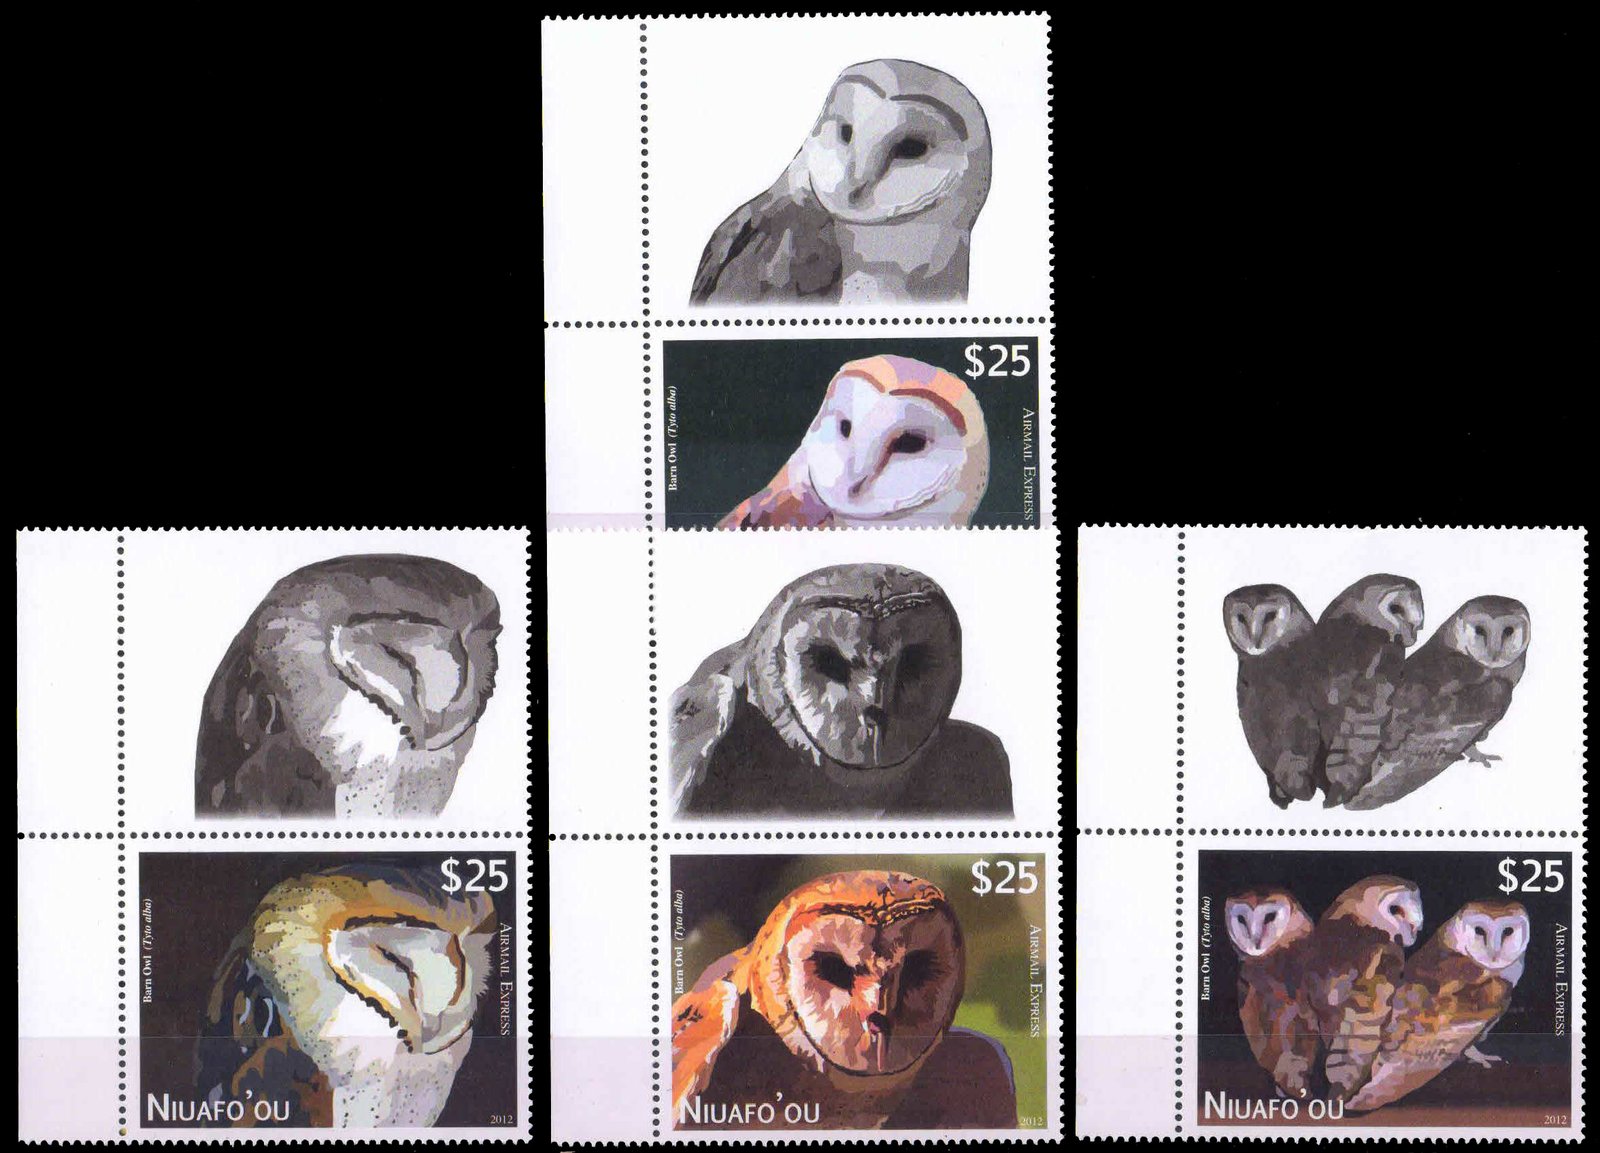 NIUAFO'OU 2012-Airmail Express Stamps-Barn Owl, Set of 4 with Tab as per Scan, S.G. E1-E4, Cat £ 88-